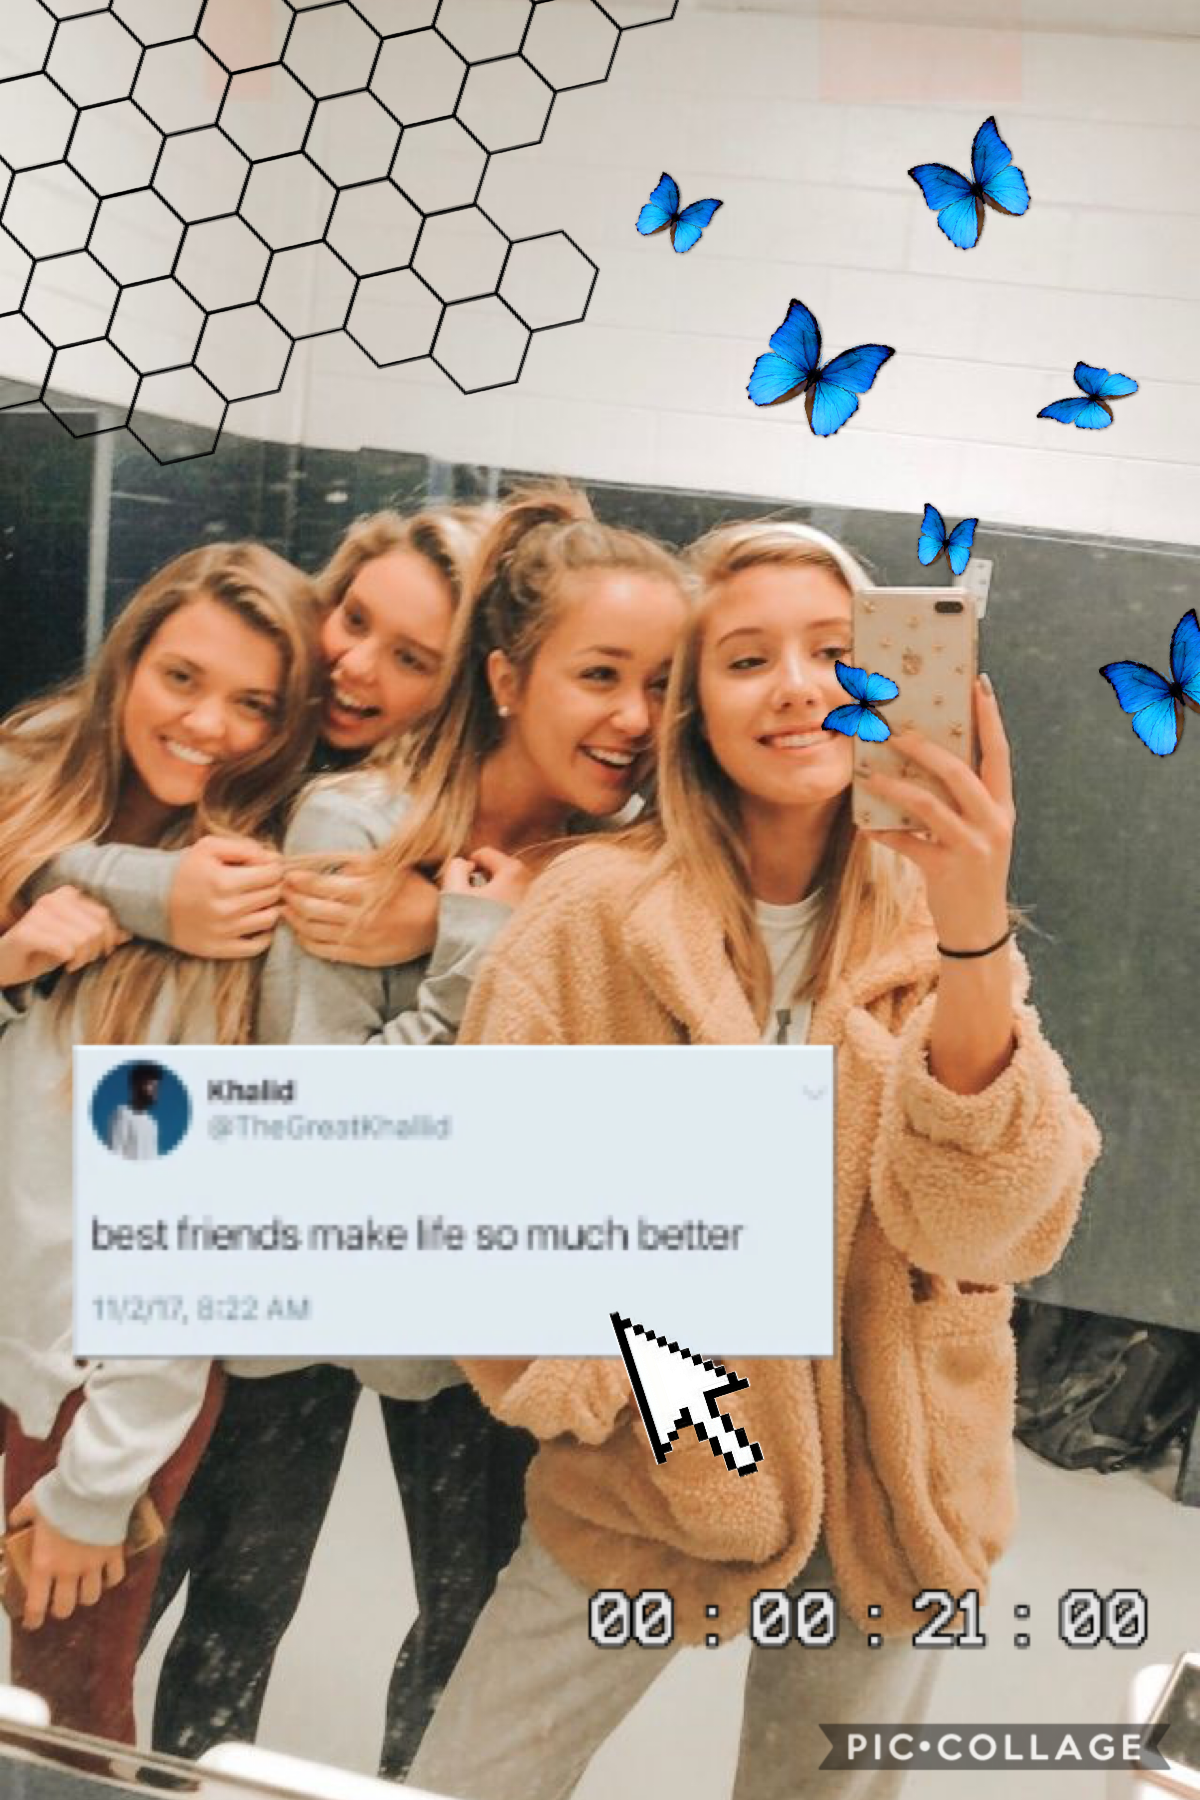 🤠tap🤠
5-2-20
Hey guys how are you! Make sure to go follow me on Pinterest @sunshine.and.daisys I am on there all the time! 
 
Qotd: how many friends do you have in your friend group 
Aotd: 7